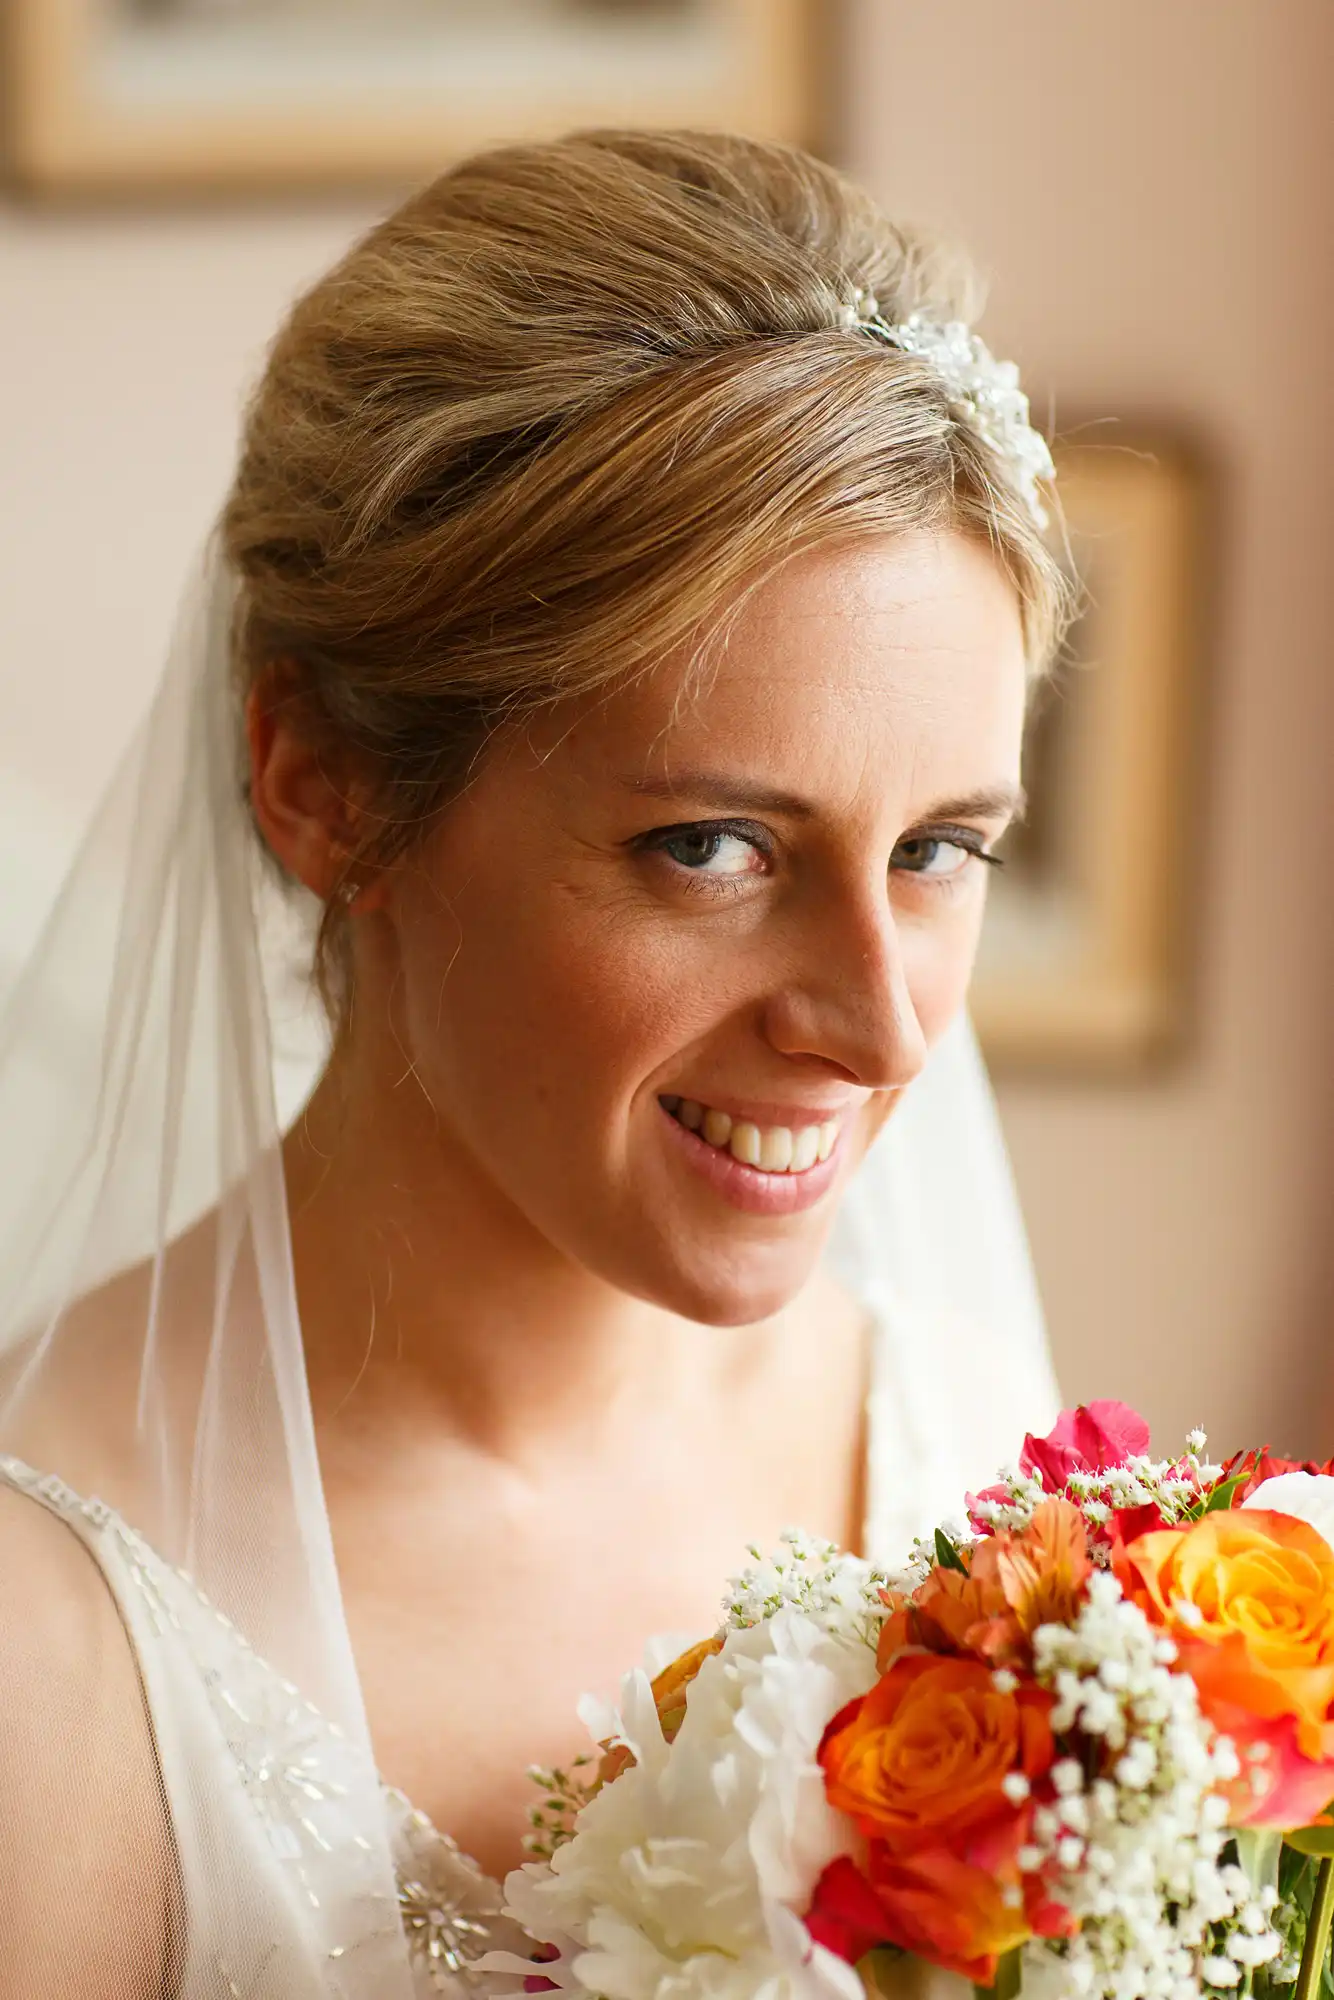 A bride smiling gently, holding a bouquet of bright orange and white flowers, wearing a white dress and a veil, with a hair accessory.